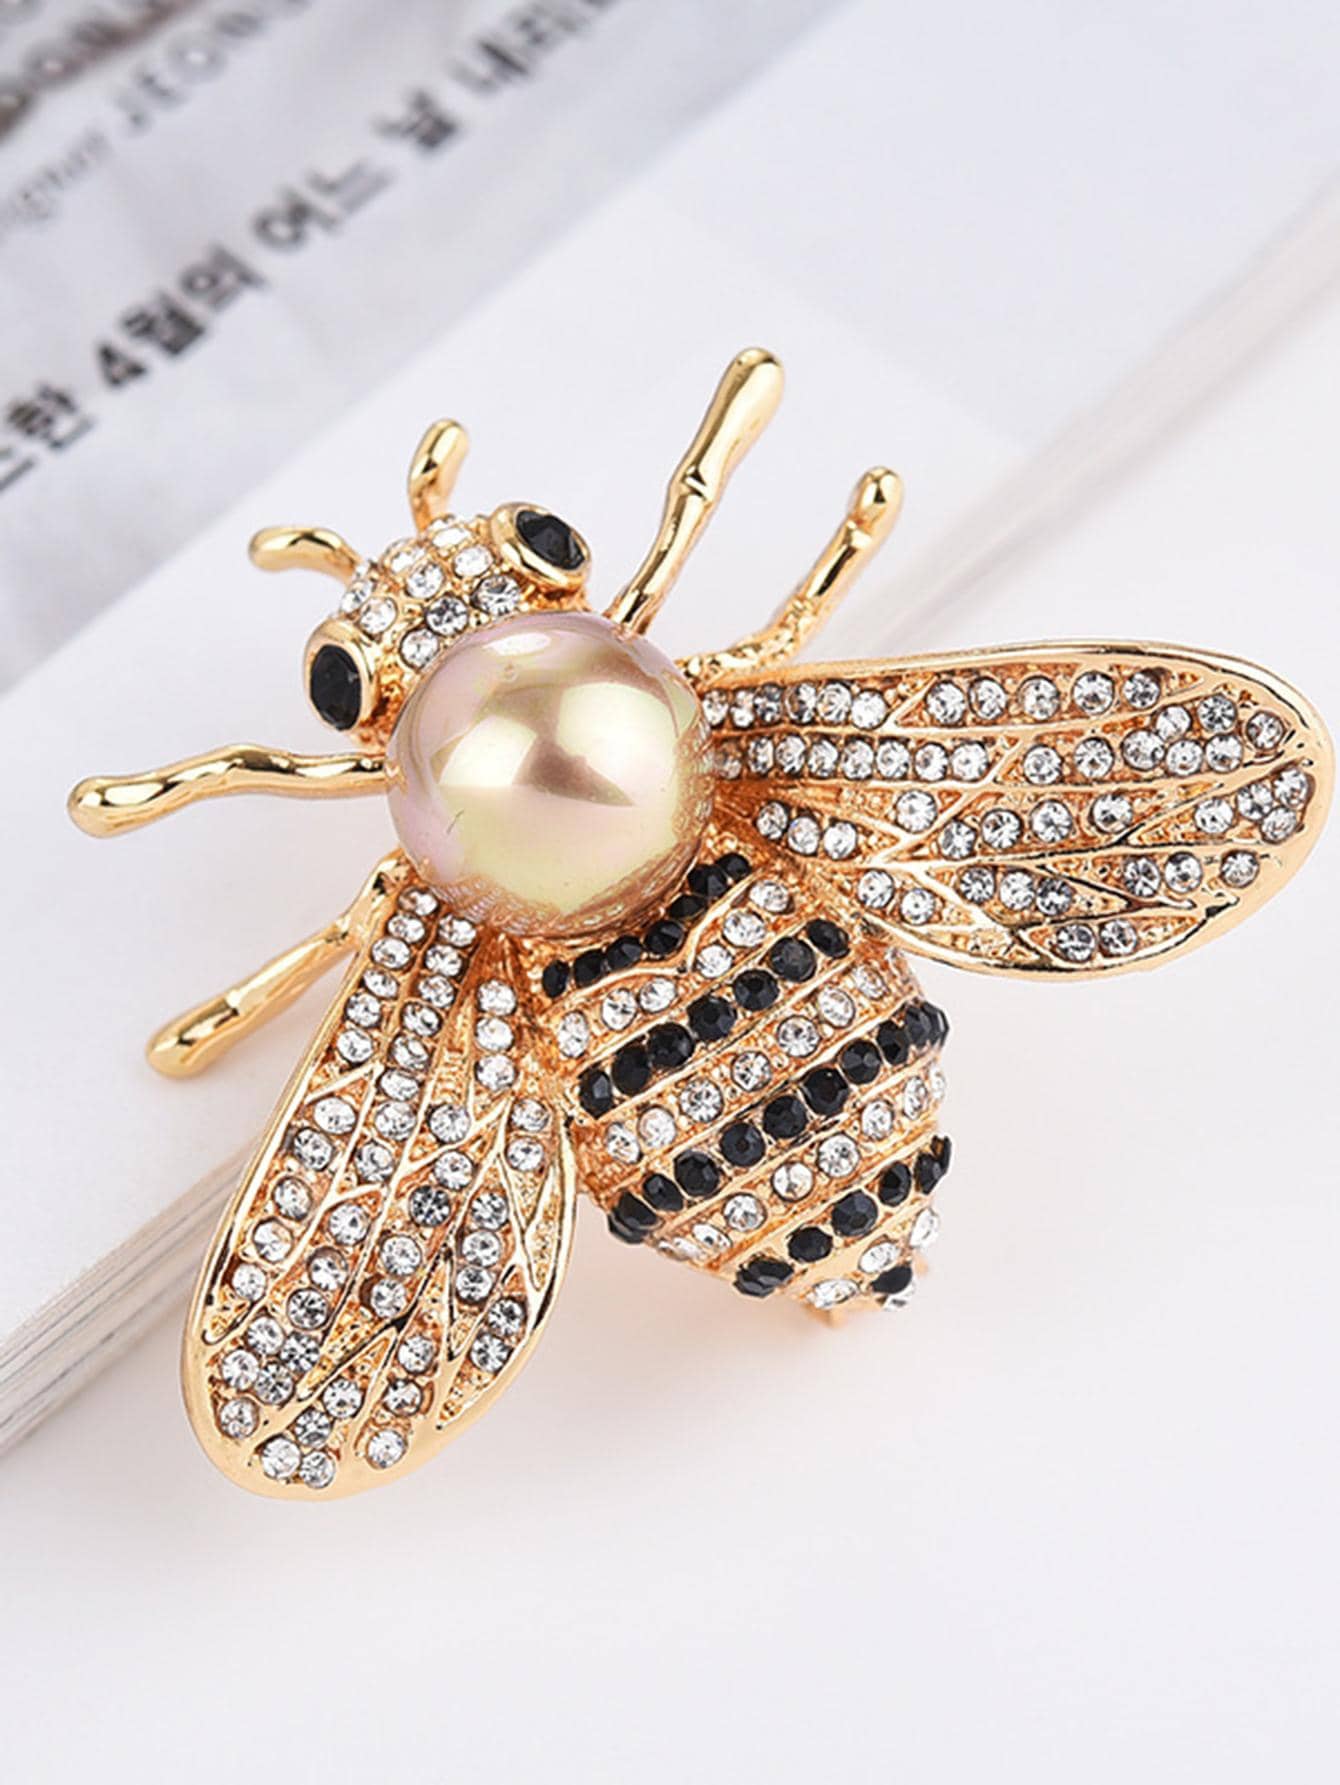 1pc Women's Elegant Faux Pearl & Bee Shaped Brooch, Fashionable Korean Style High-End Decorative Pin For Sweater/Shawl/Dress